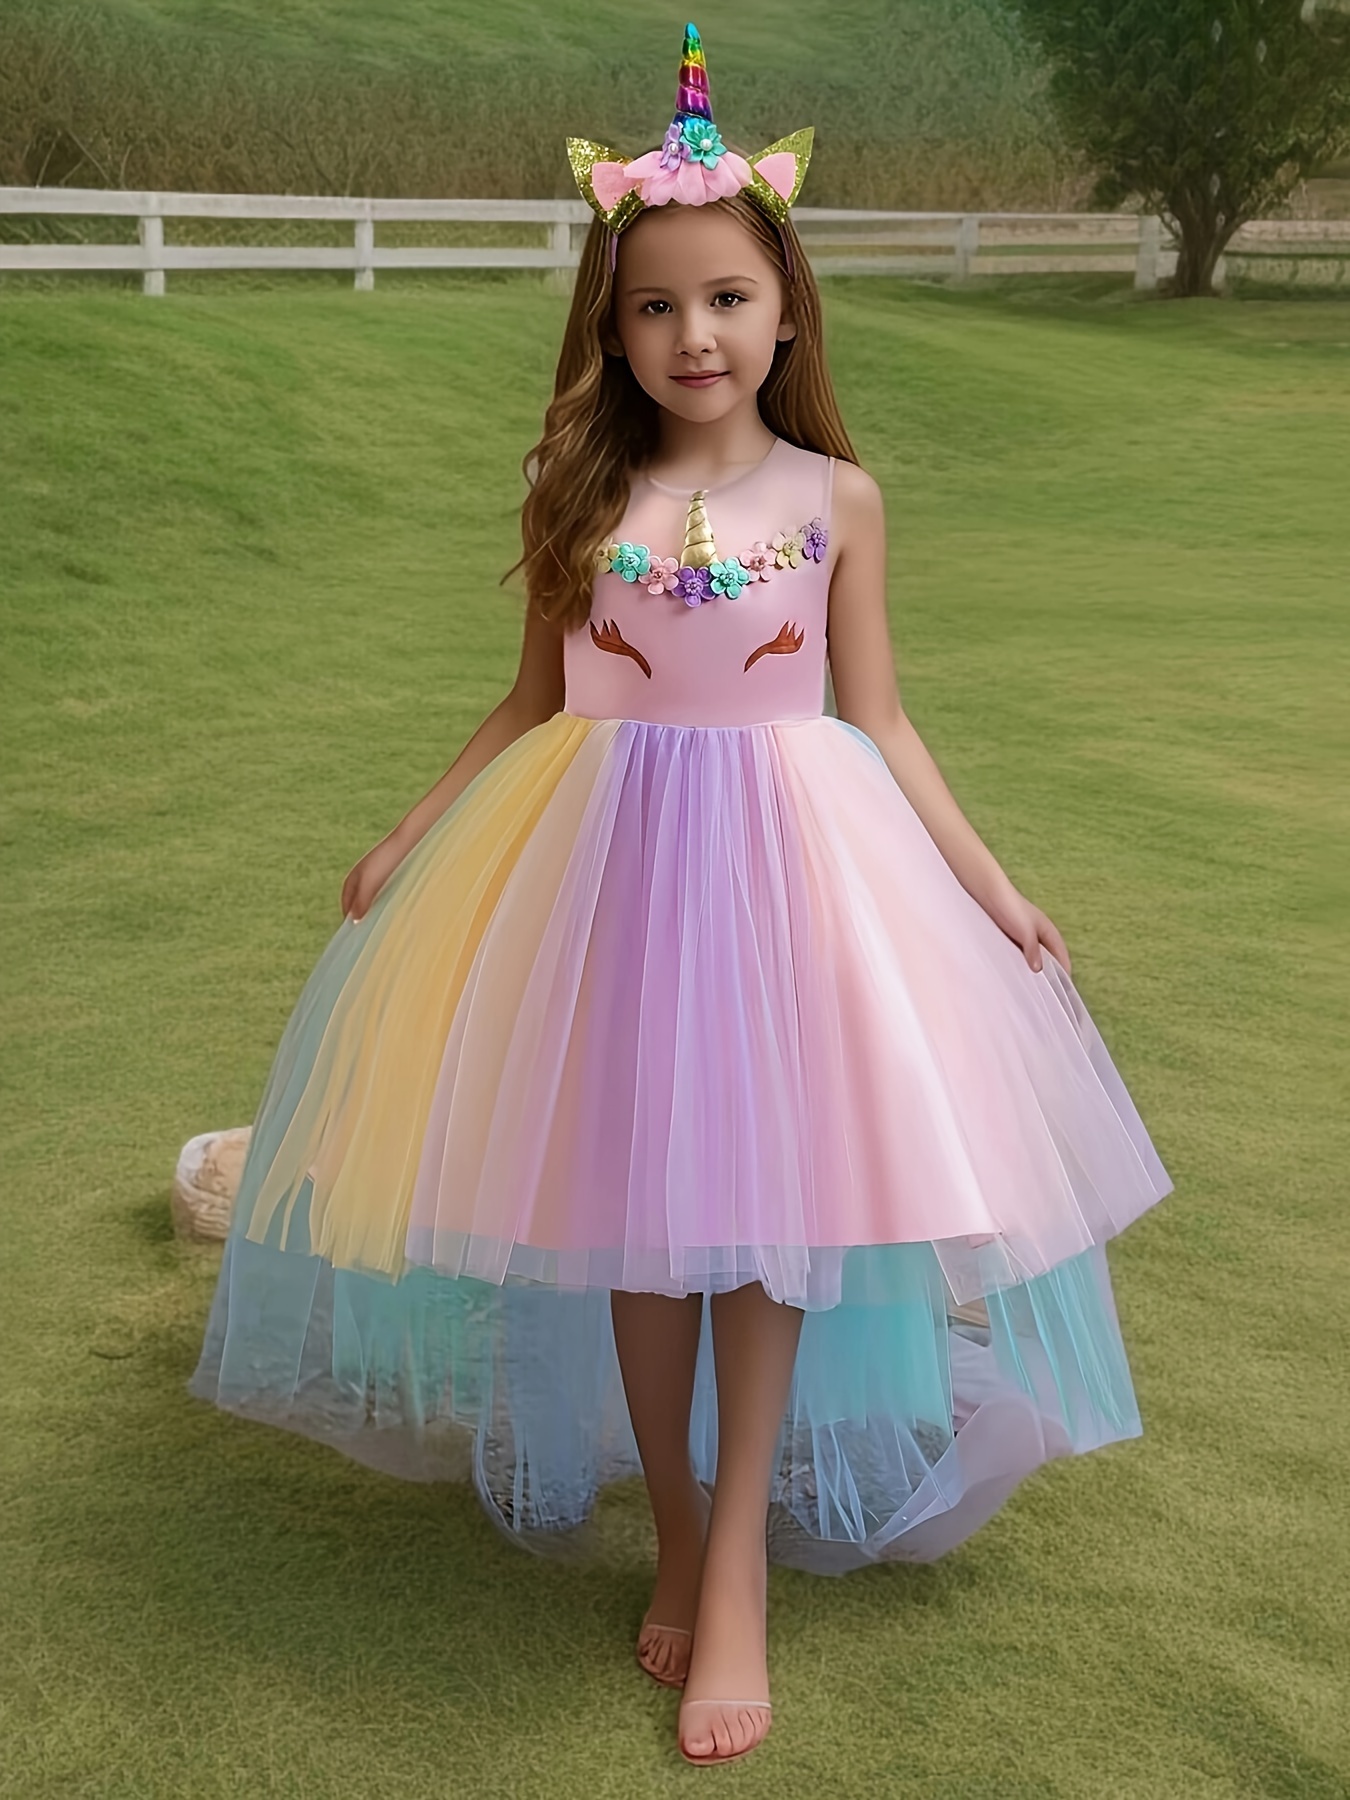 Unicorn Dresses for Girls Summer Swing Short Sleeve Casual Clothes for Kids  : : Clothing, Shoes & Accessories